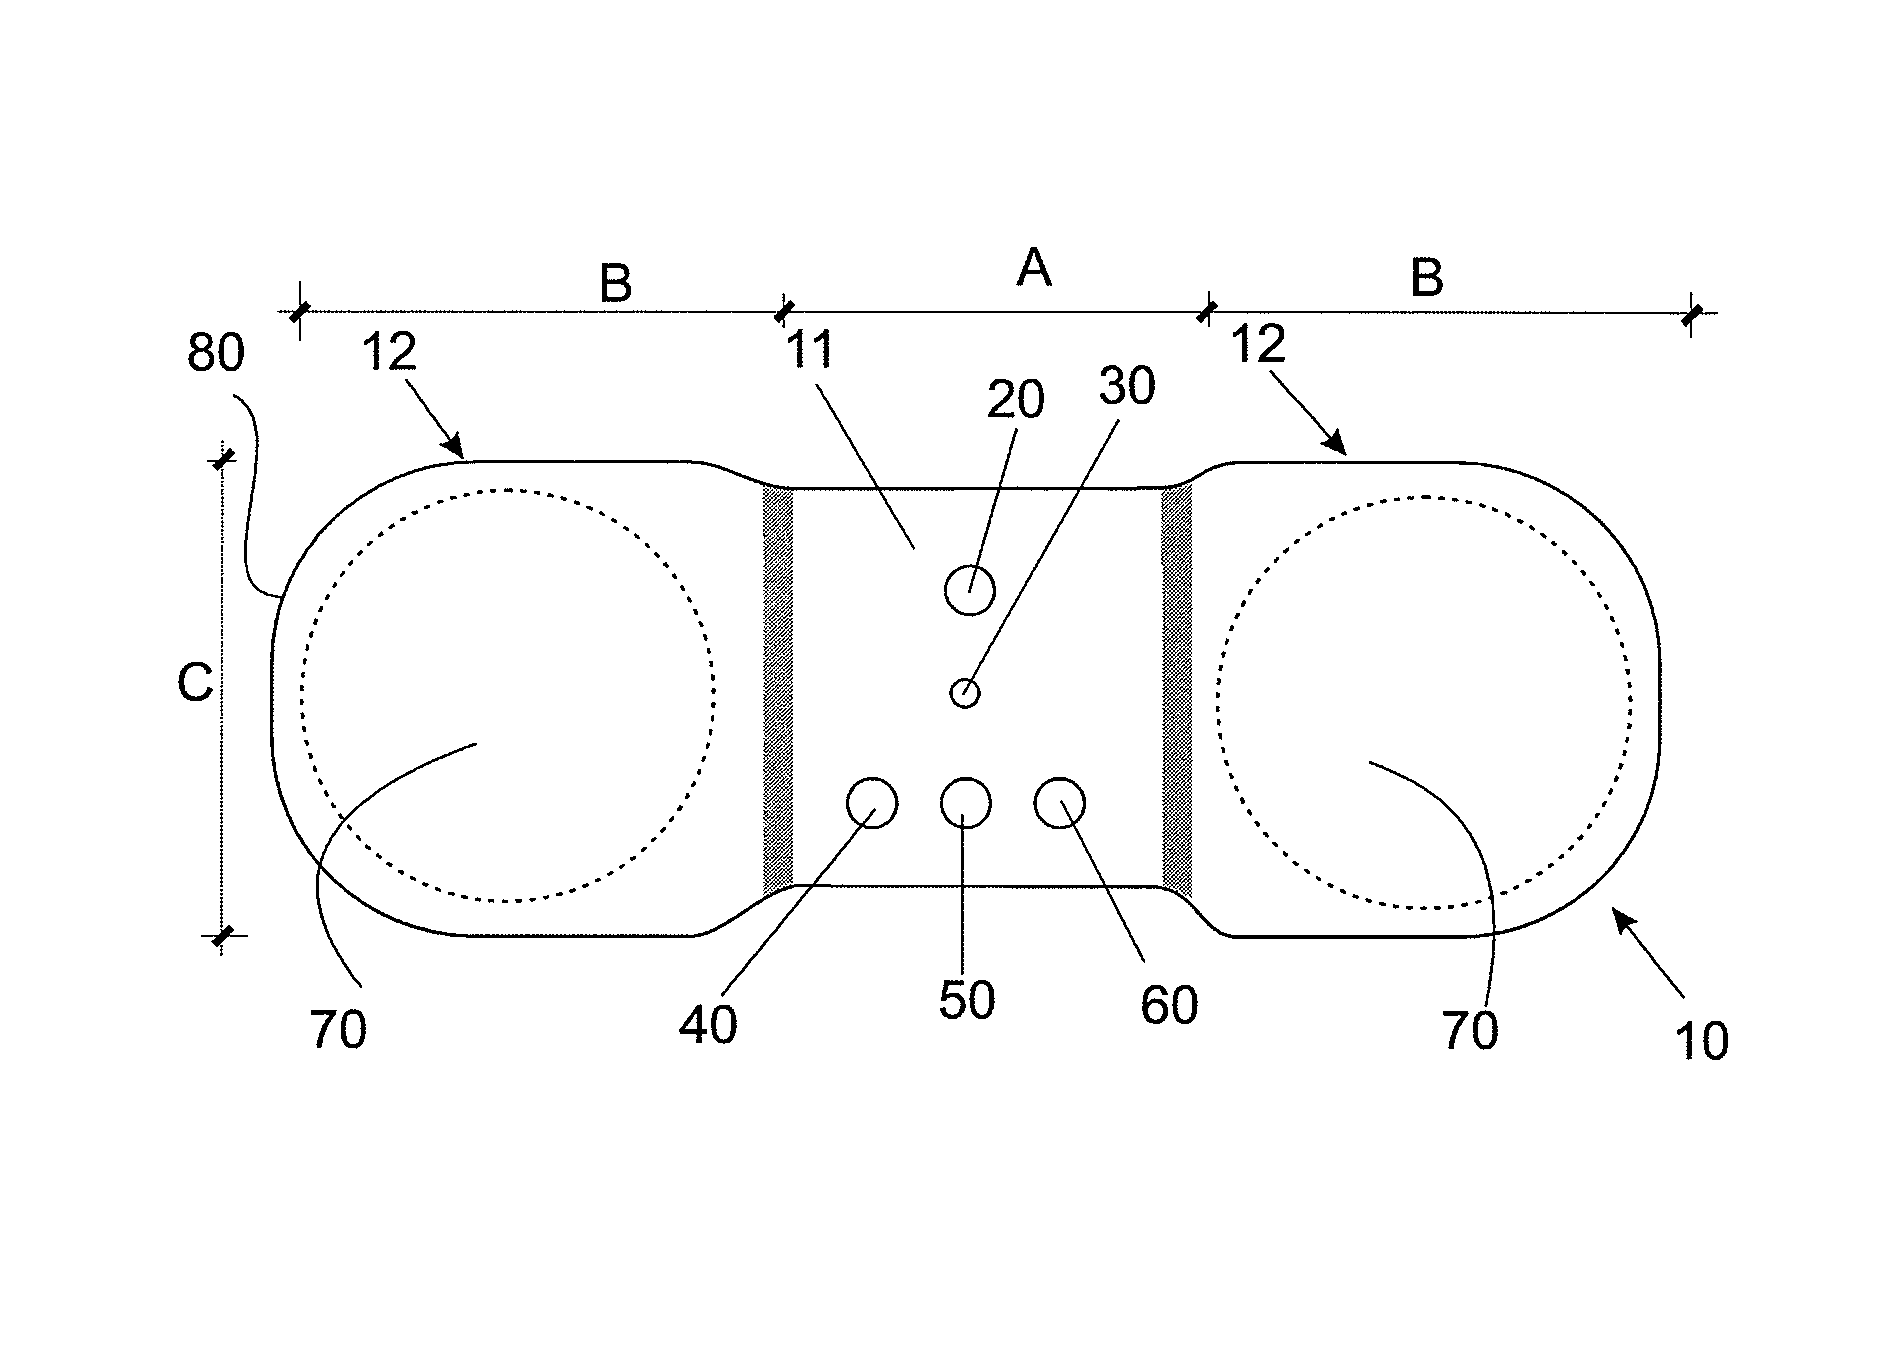 Assembly arrangement for bandage holding a transcutaneous electrical nerve stimulation device